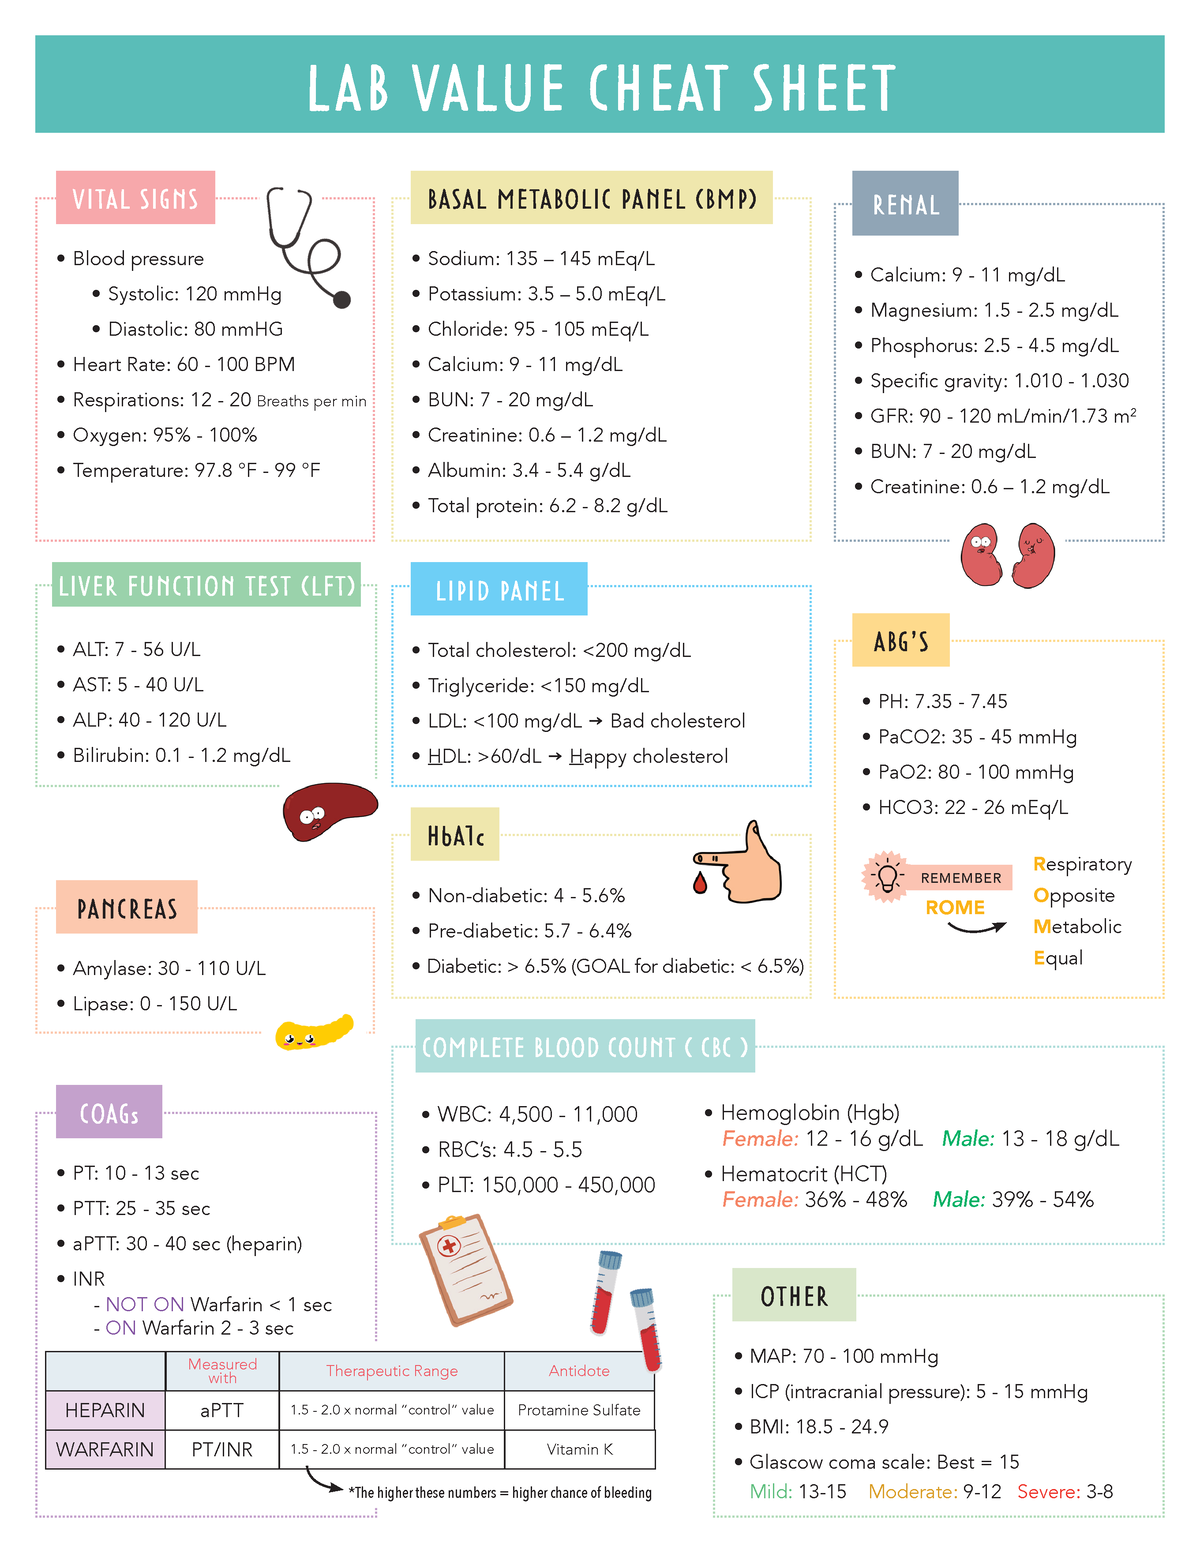 Lab Values Cheat Sheet LAB VALUE CHEAT SHEET COMPLETE BLOOD COUNT